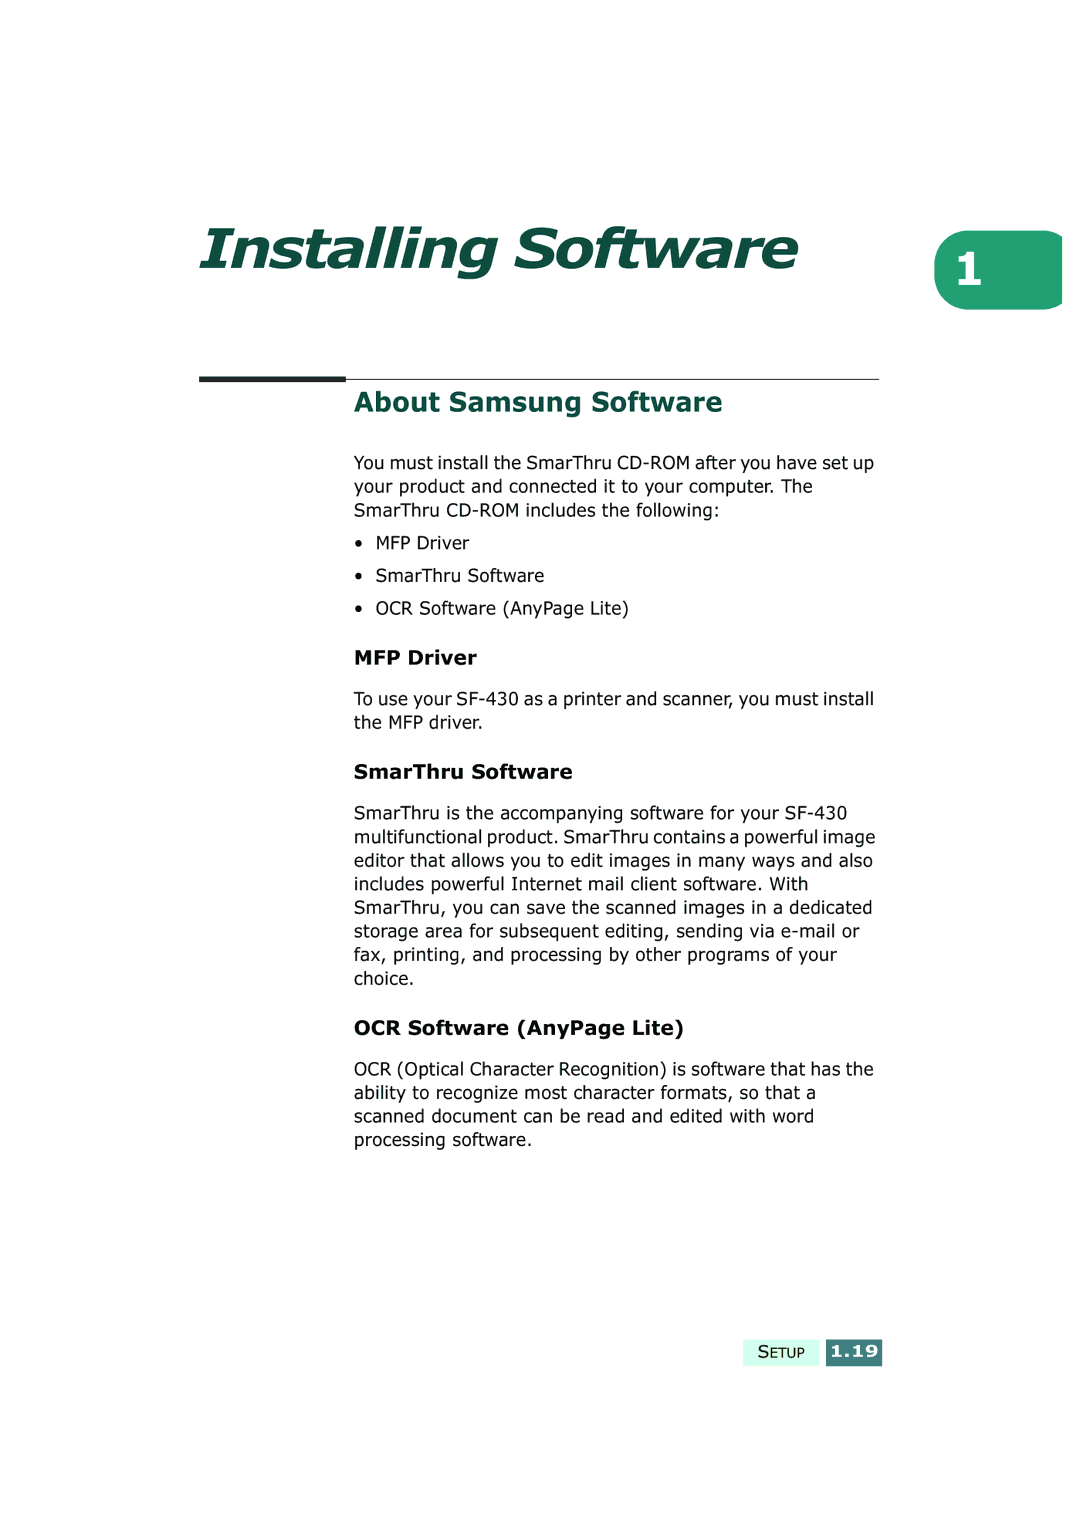 Samsung SF-430 manual About Samsung Software, MFP Driver, SmarThru Software, OCR Software AnyPage Lite 